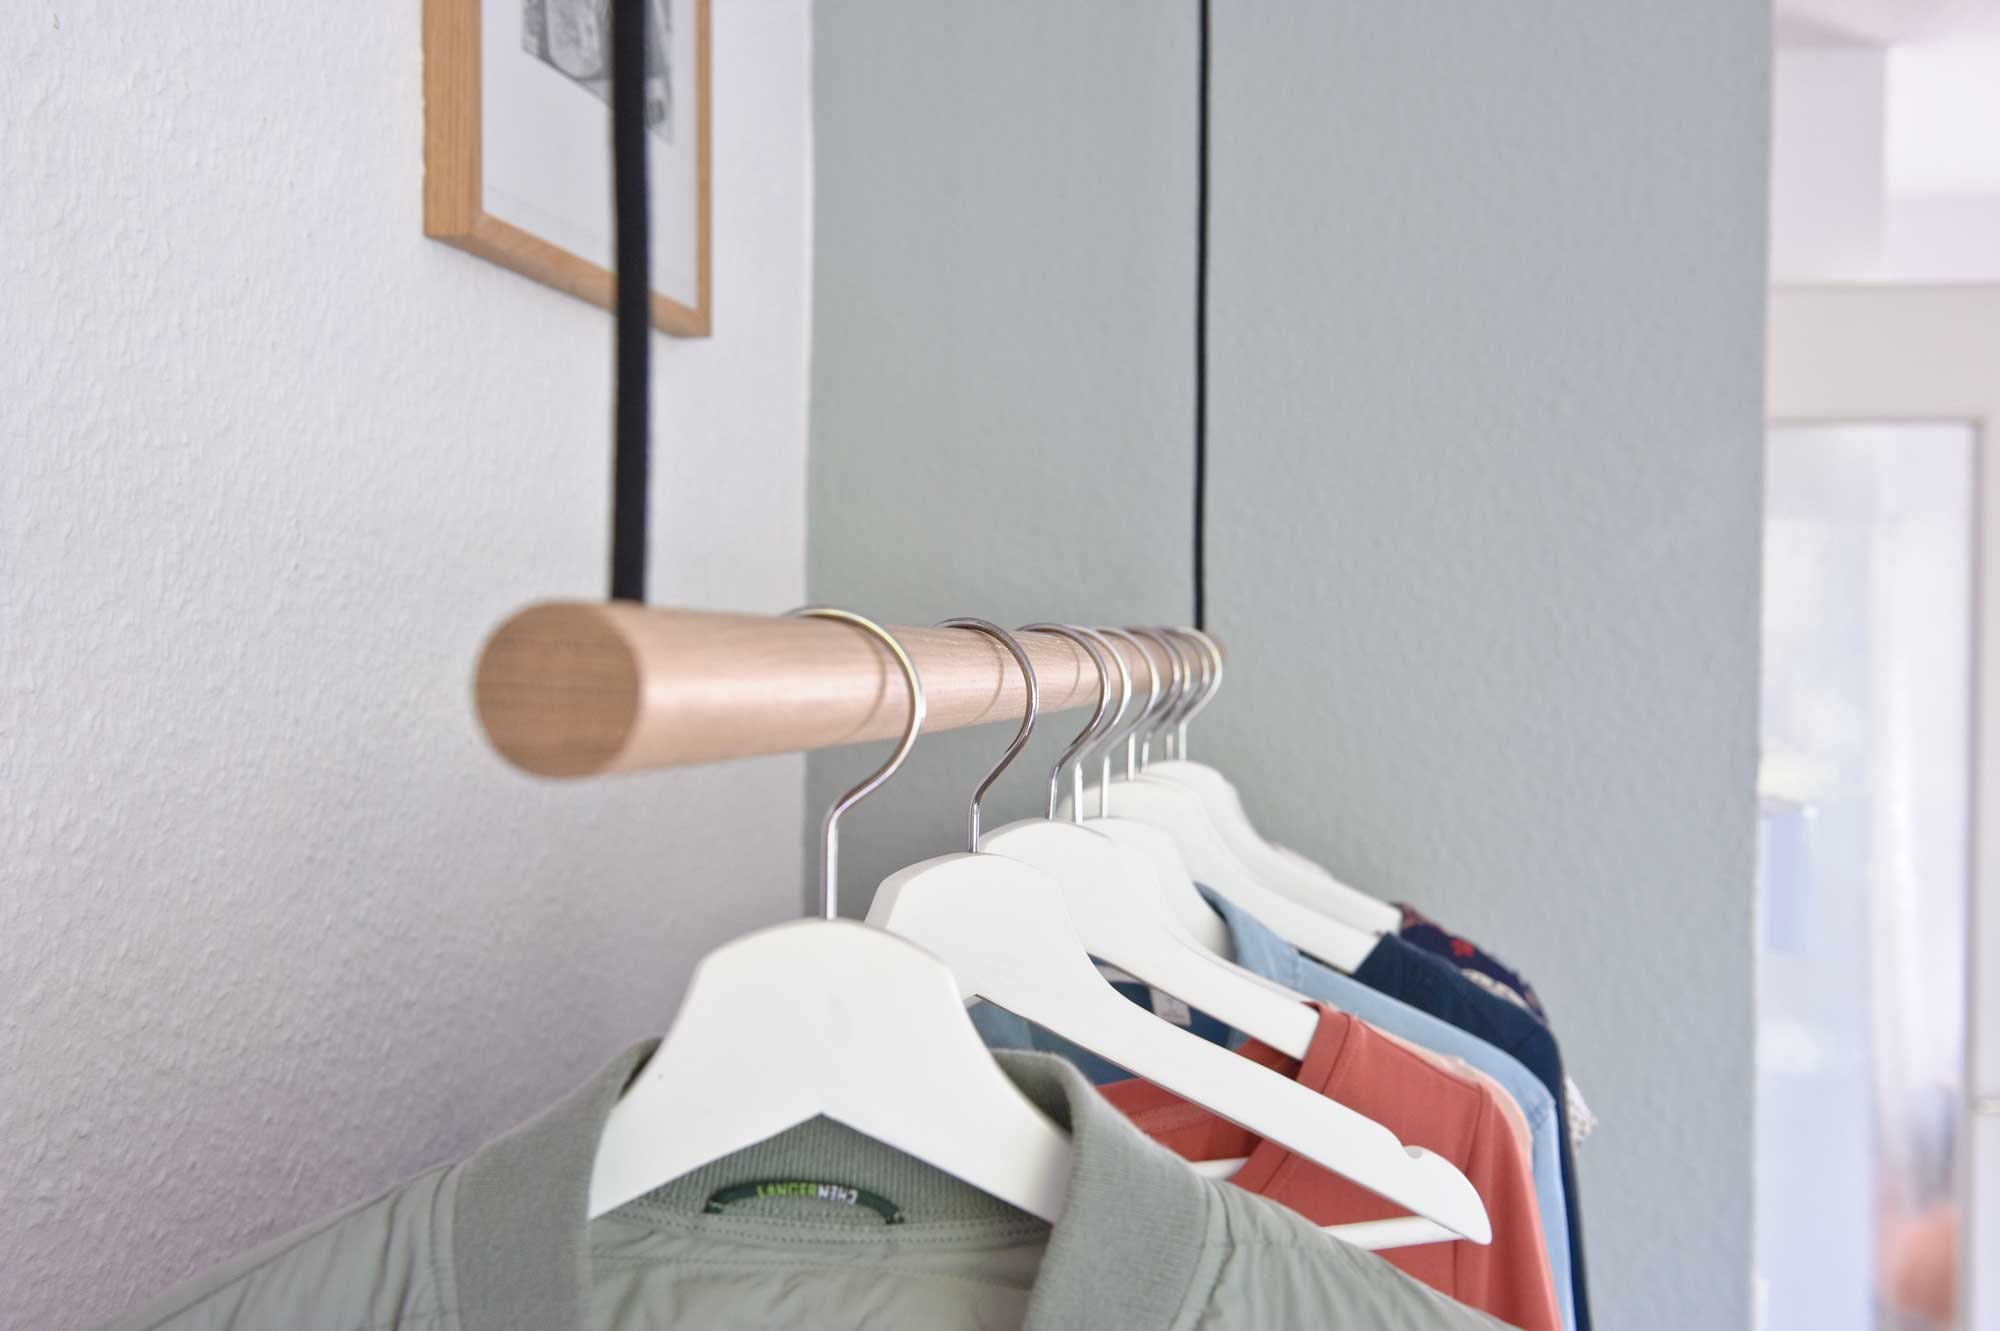 Leather Straps for Clothes Rail Hanging Garment Clothing Rack